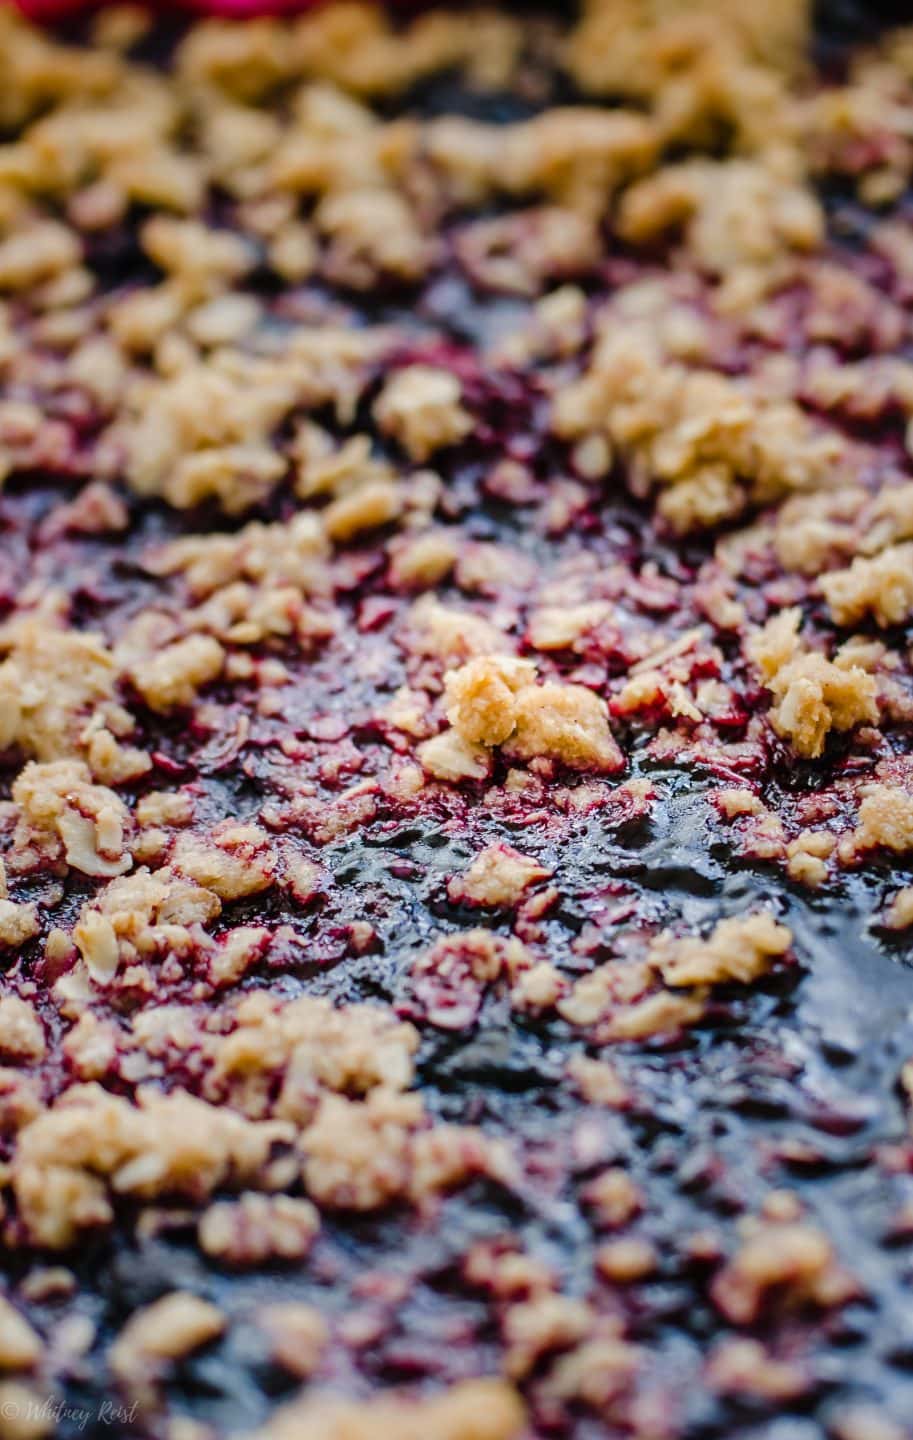 A close-up shot of the crumble on a berry crisp to show the texture.